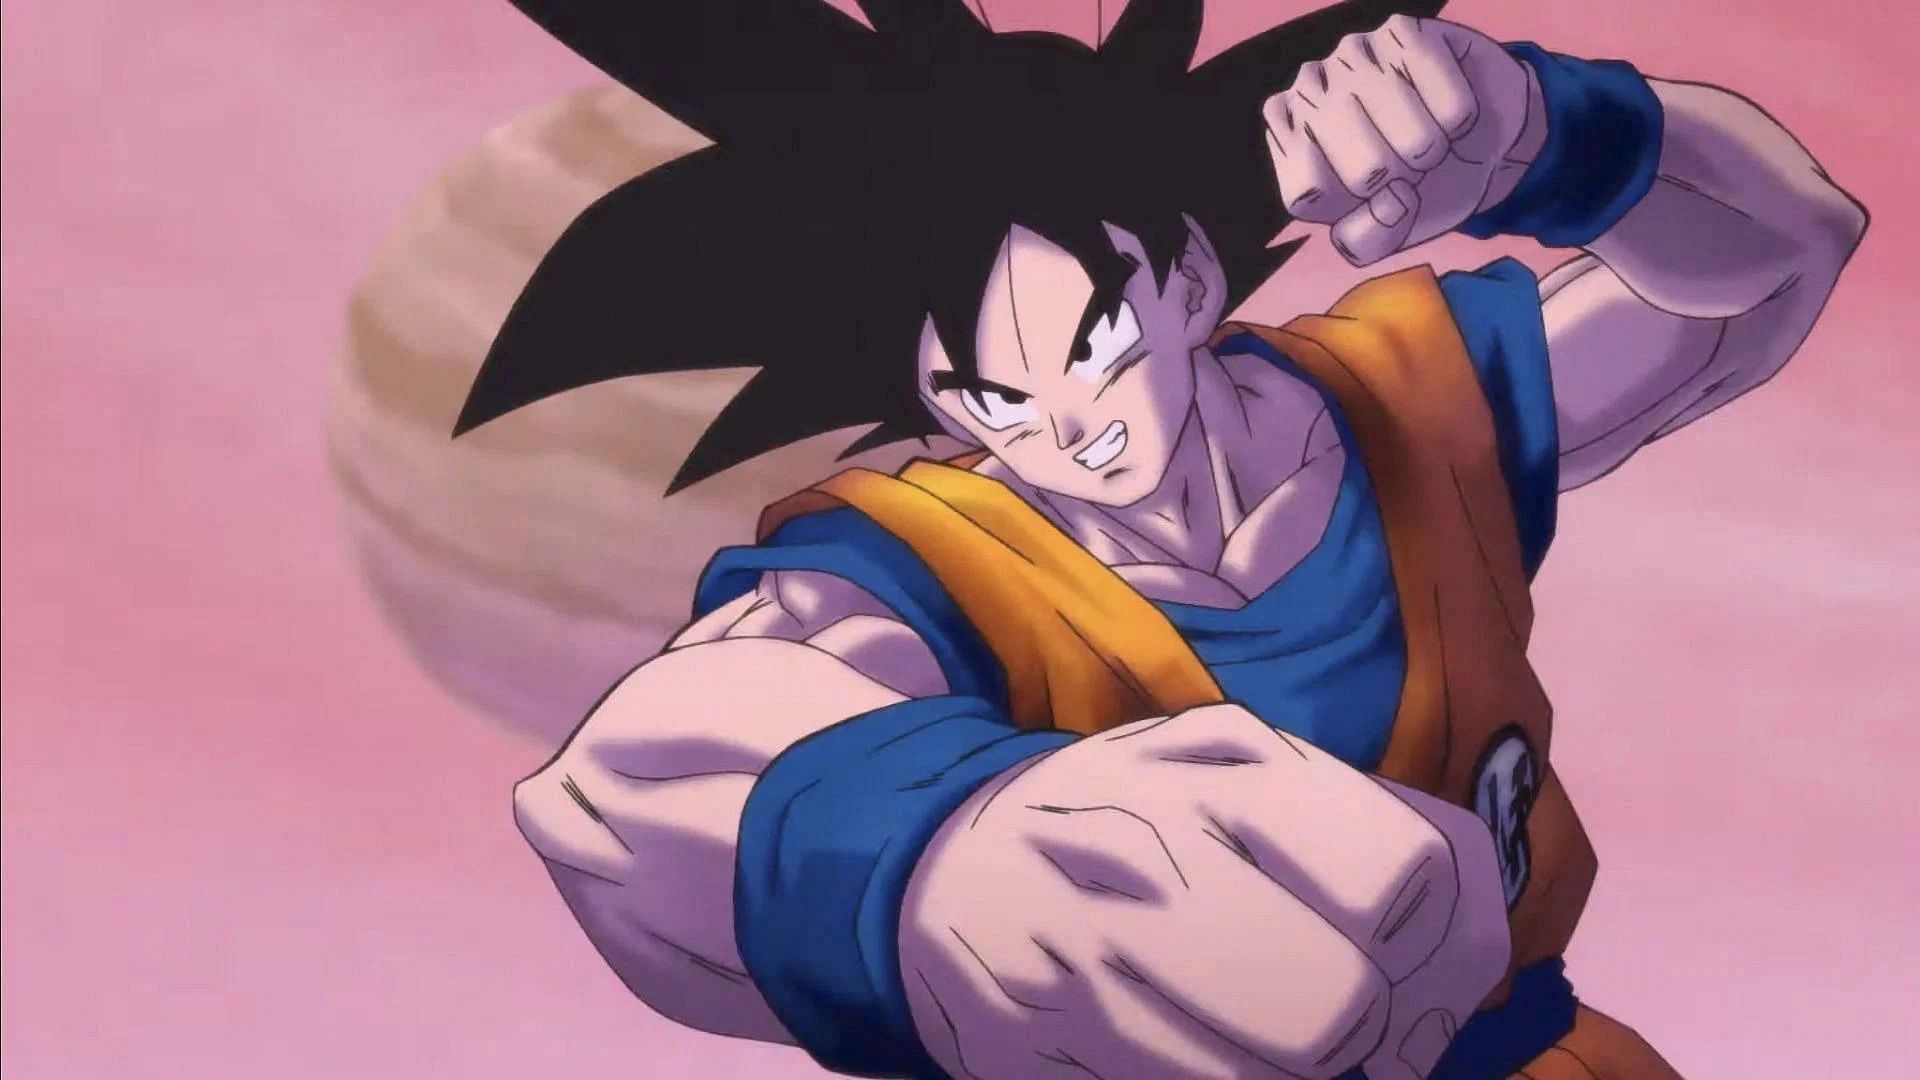 Loved 'Dragon Ball Super'? Then check out these other anime shows to binge  next